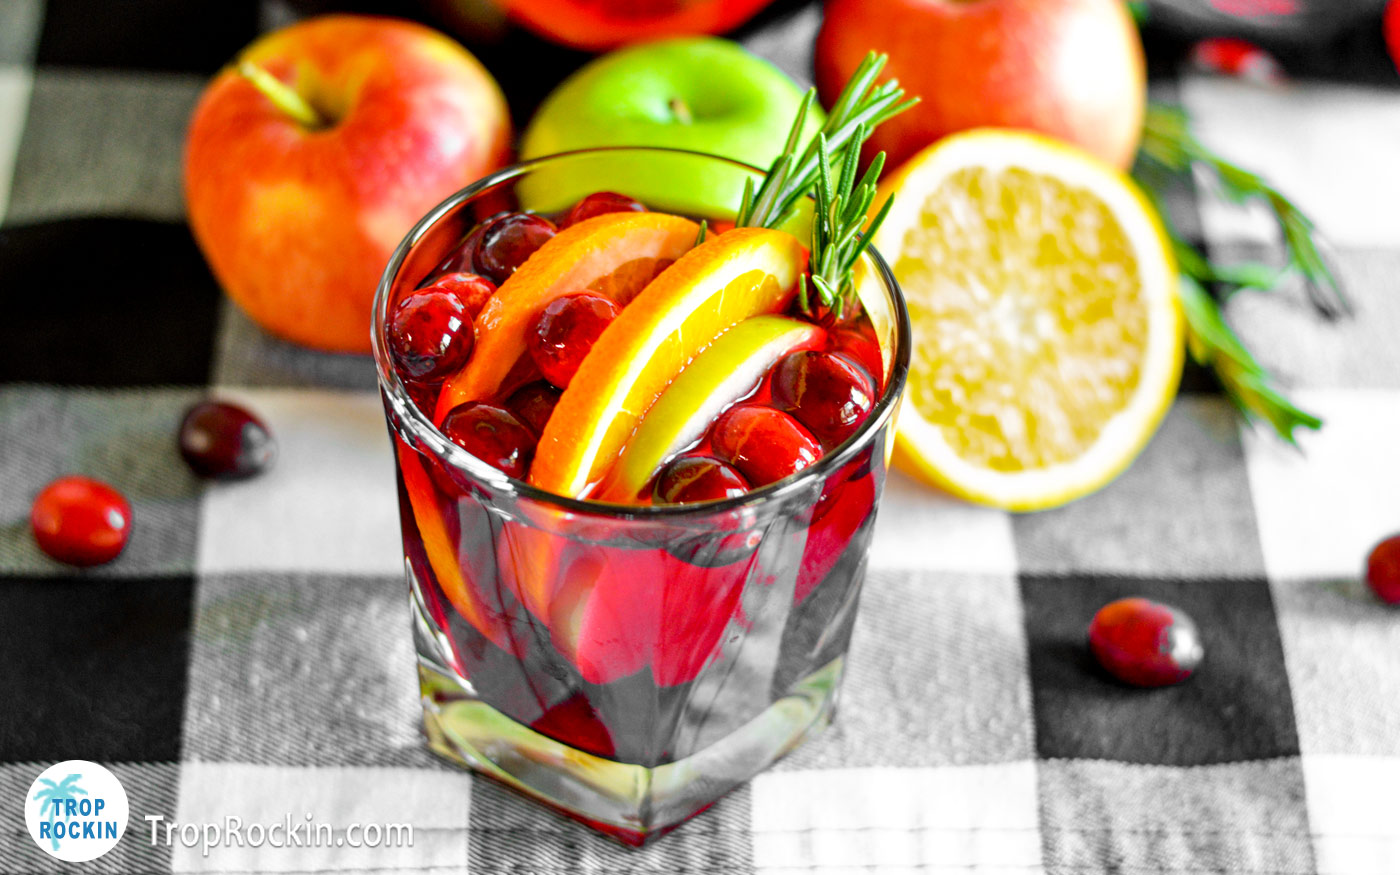 Low ball glass full of fruity cranberry sangria with fresh fruits in the background.